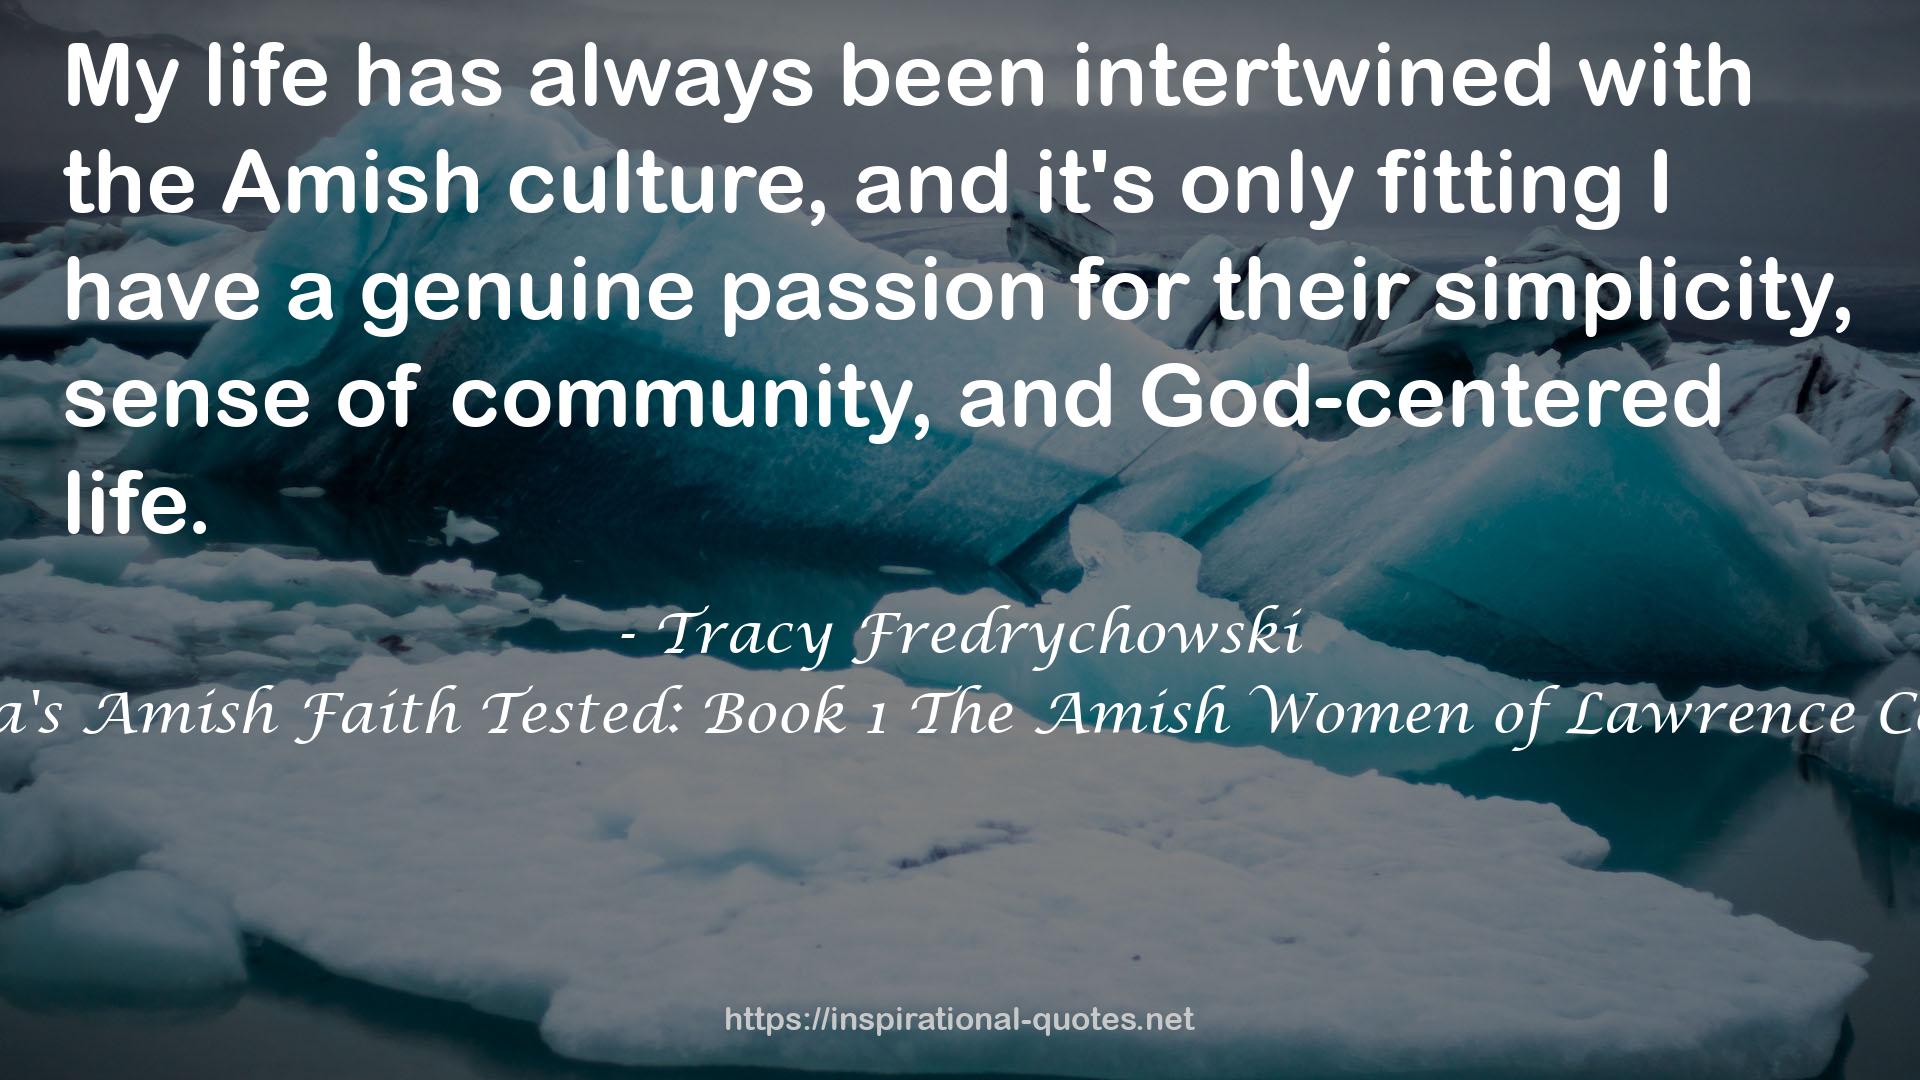 Emma's Amish Faith Tested: Book 1 The Amish Women of Lawrence County QUOTES